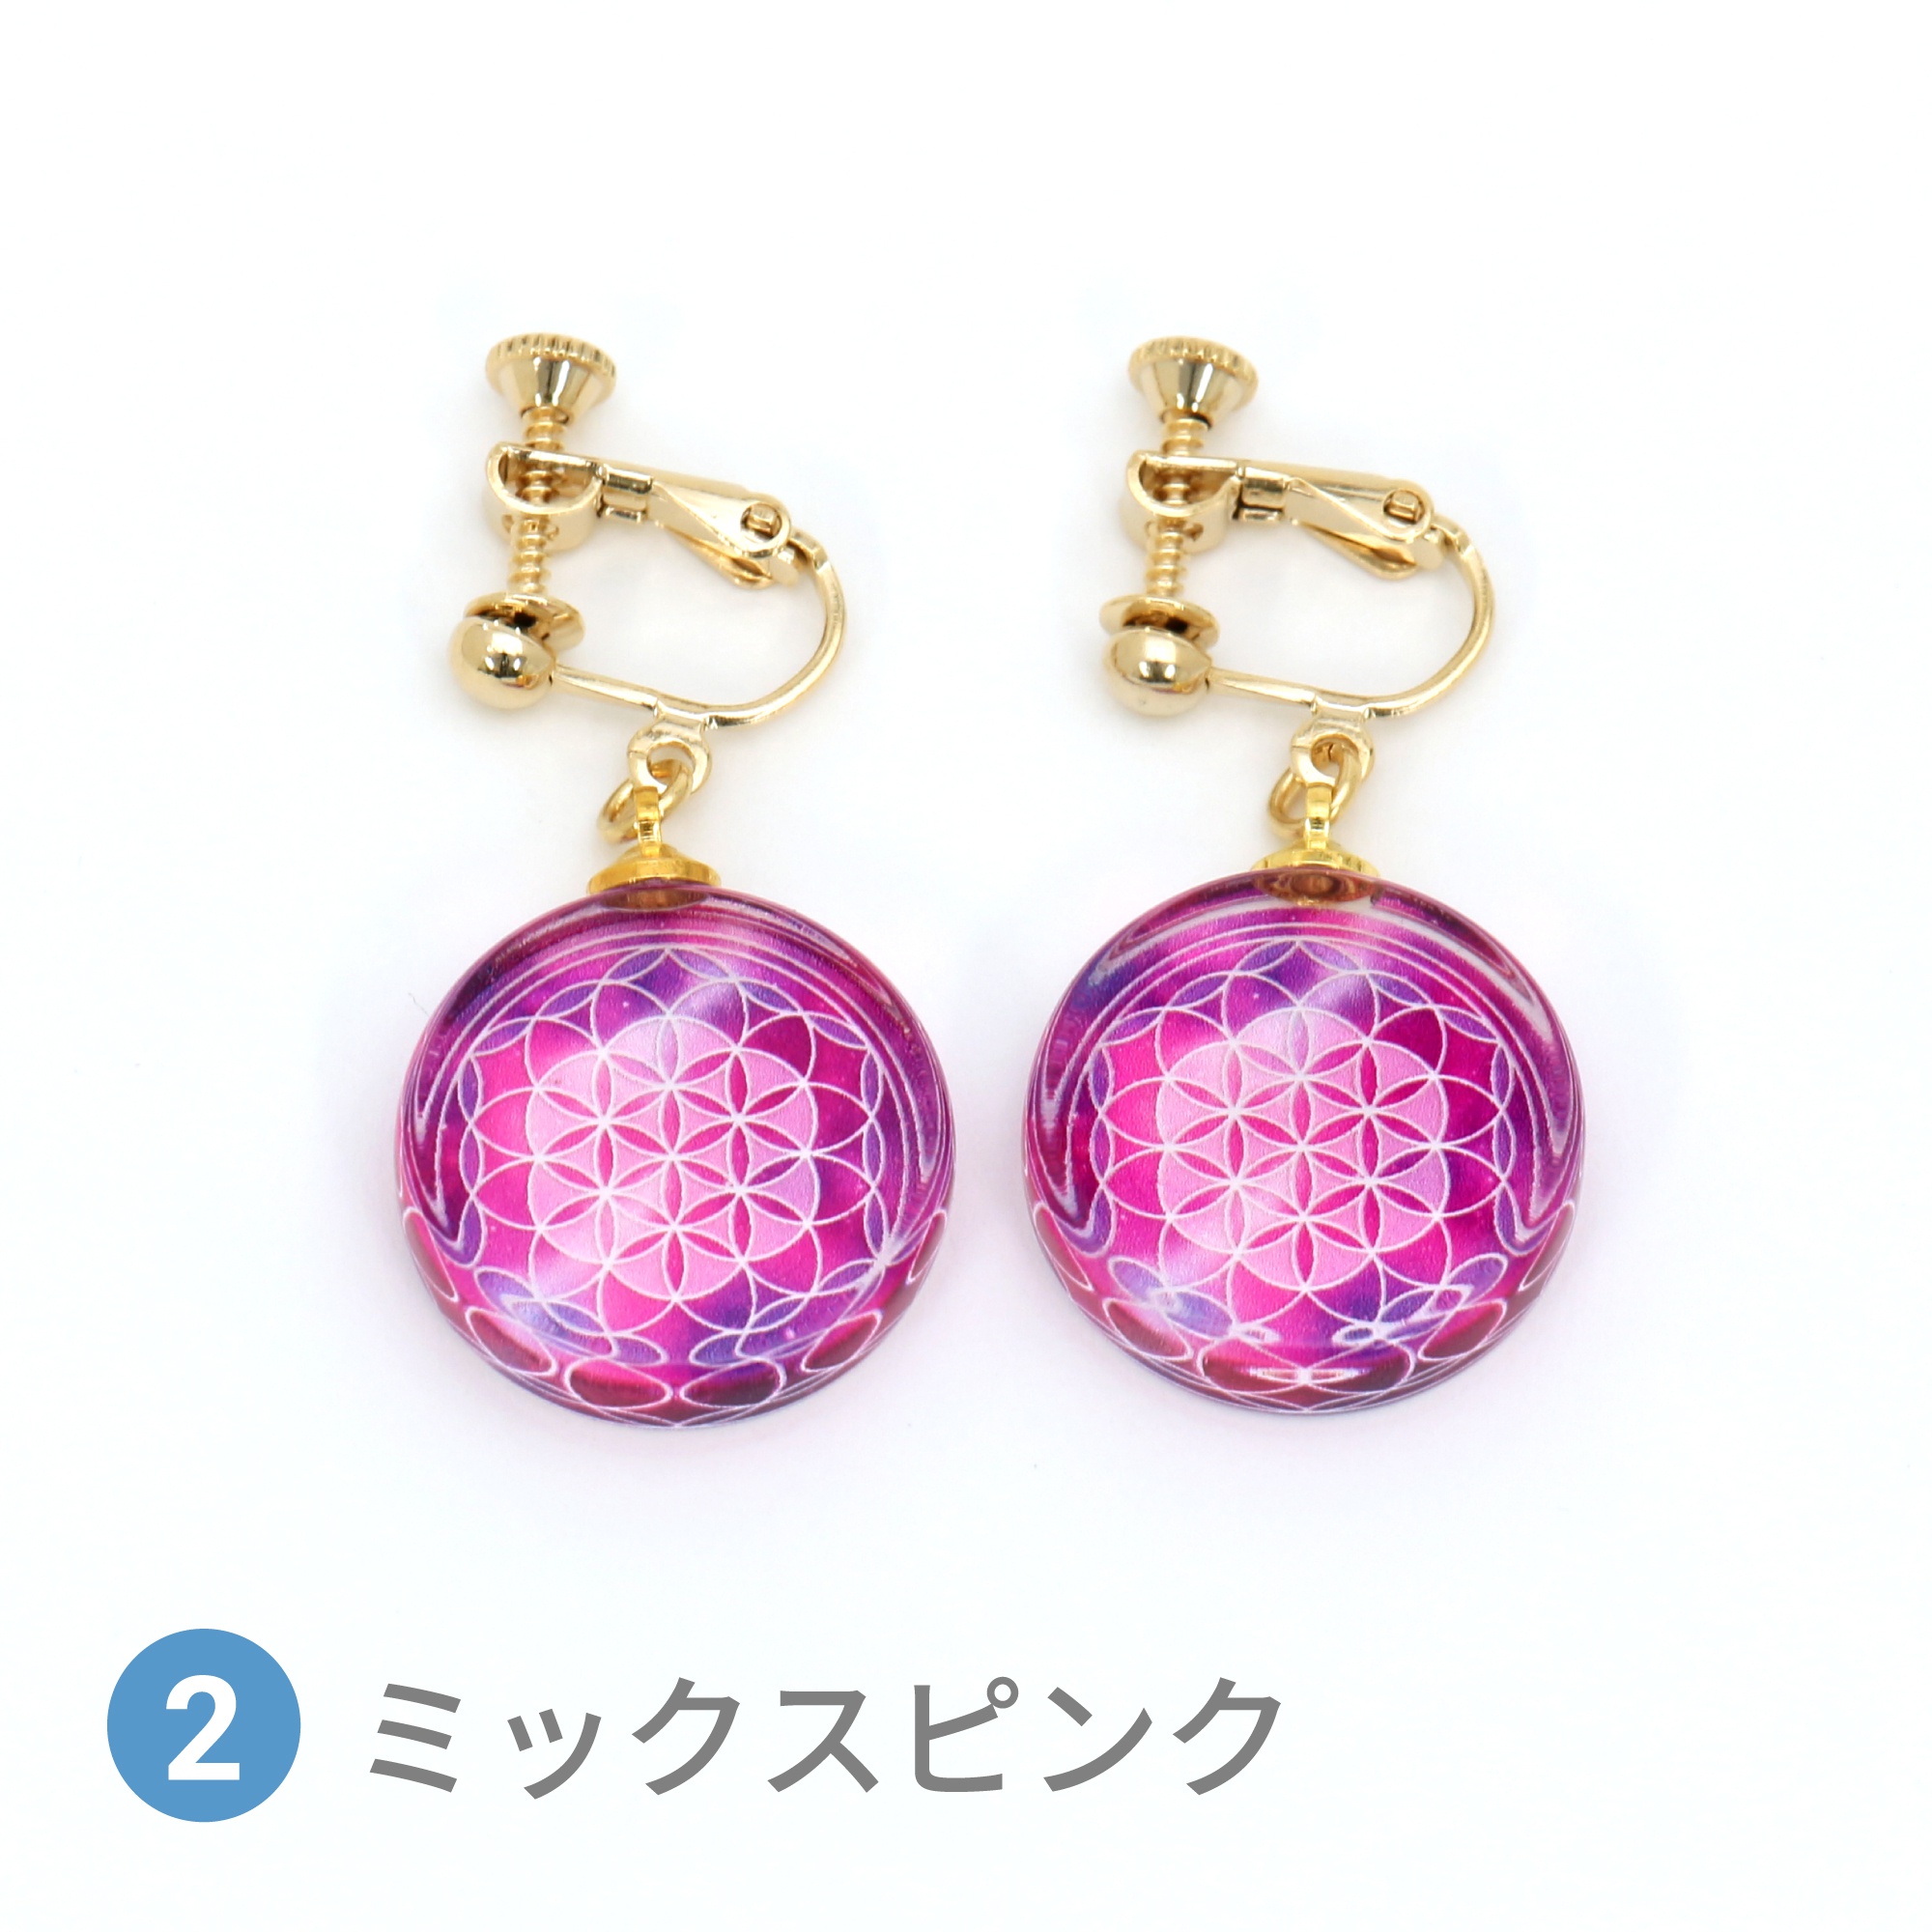 Glass accessories Earring FLOWER OF LIFE mix pink round shape